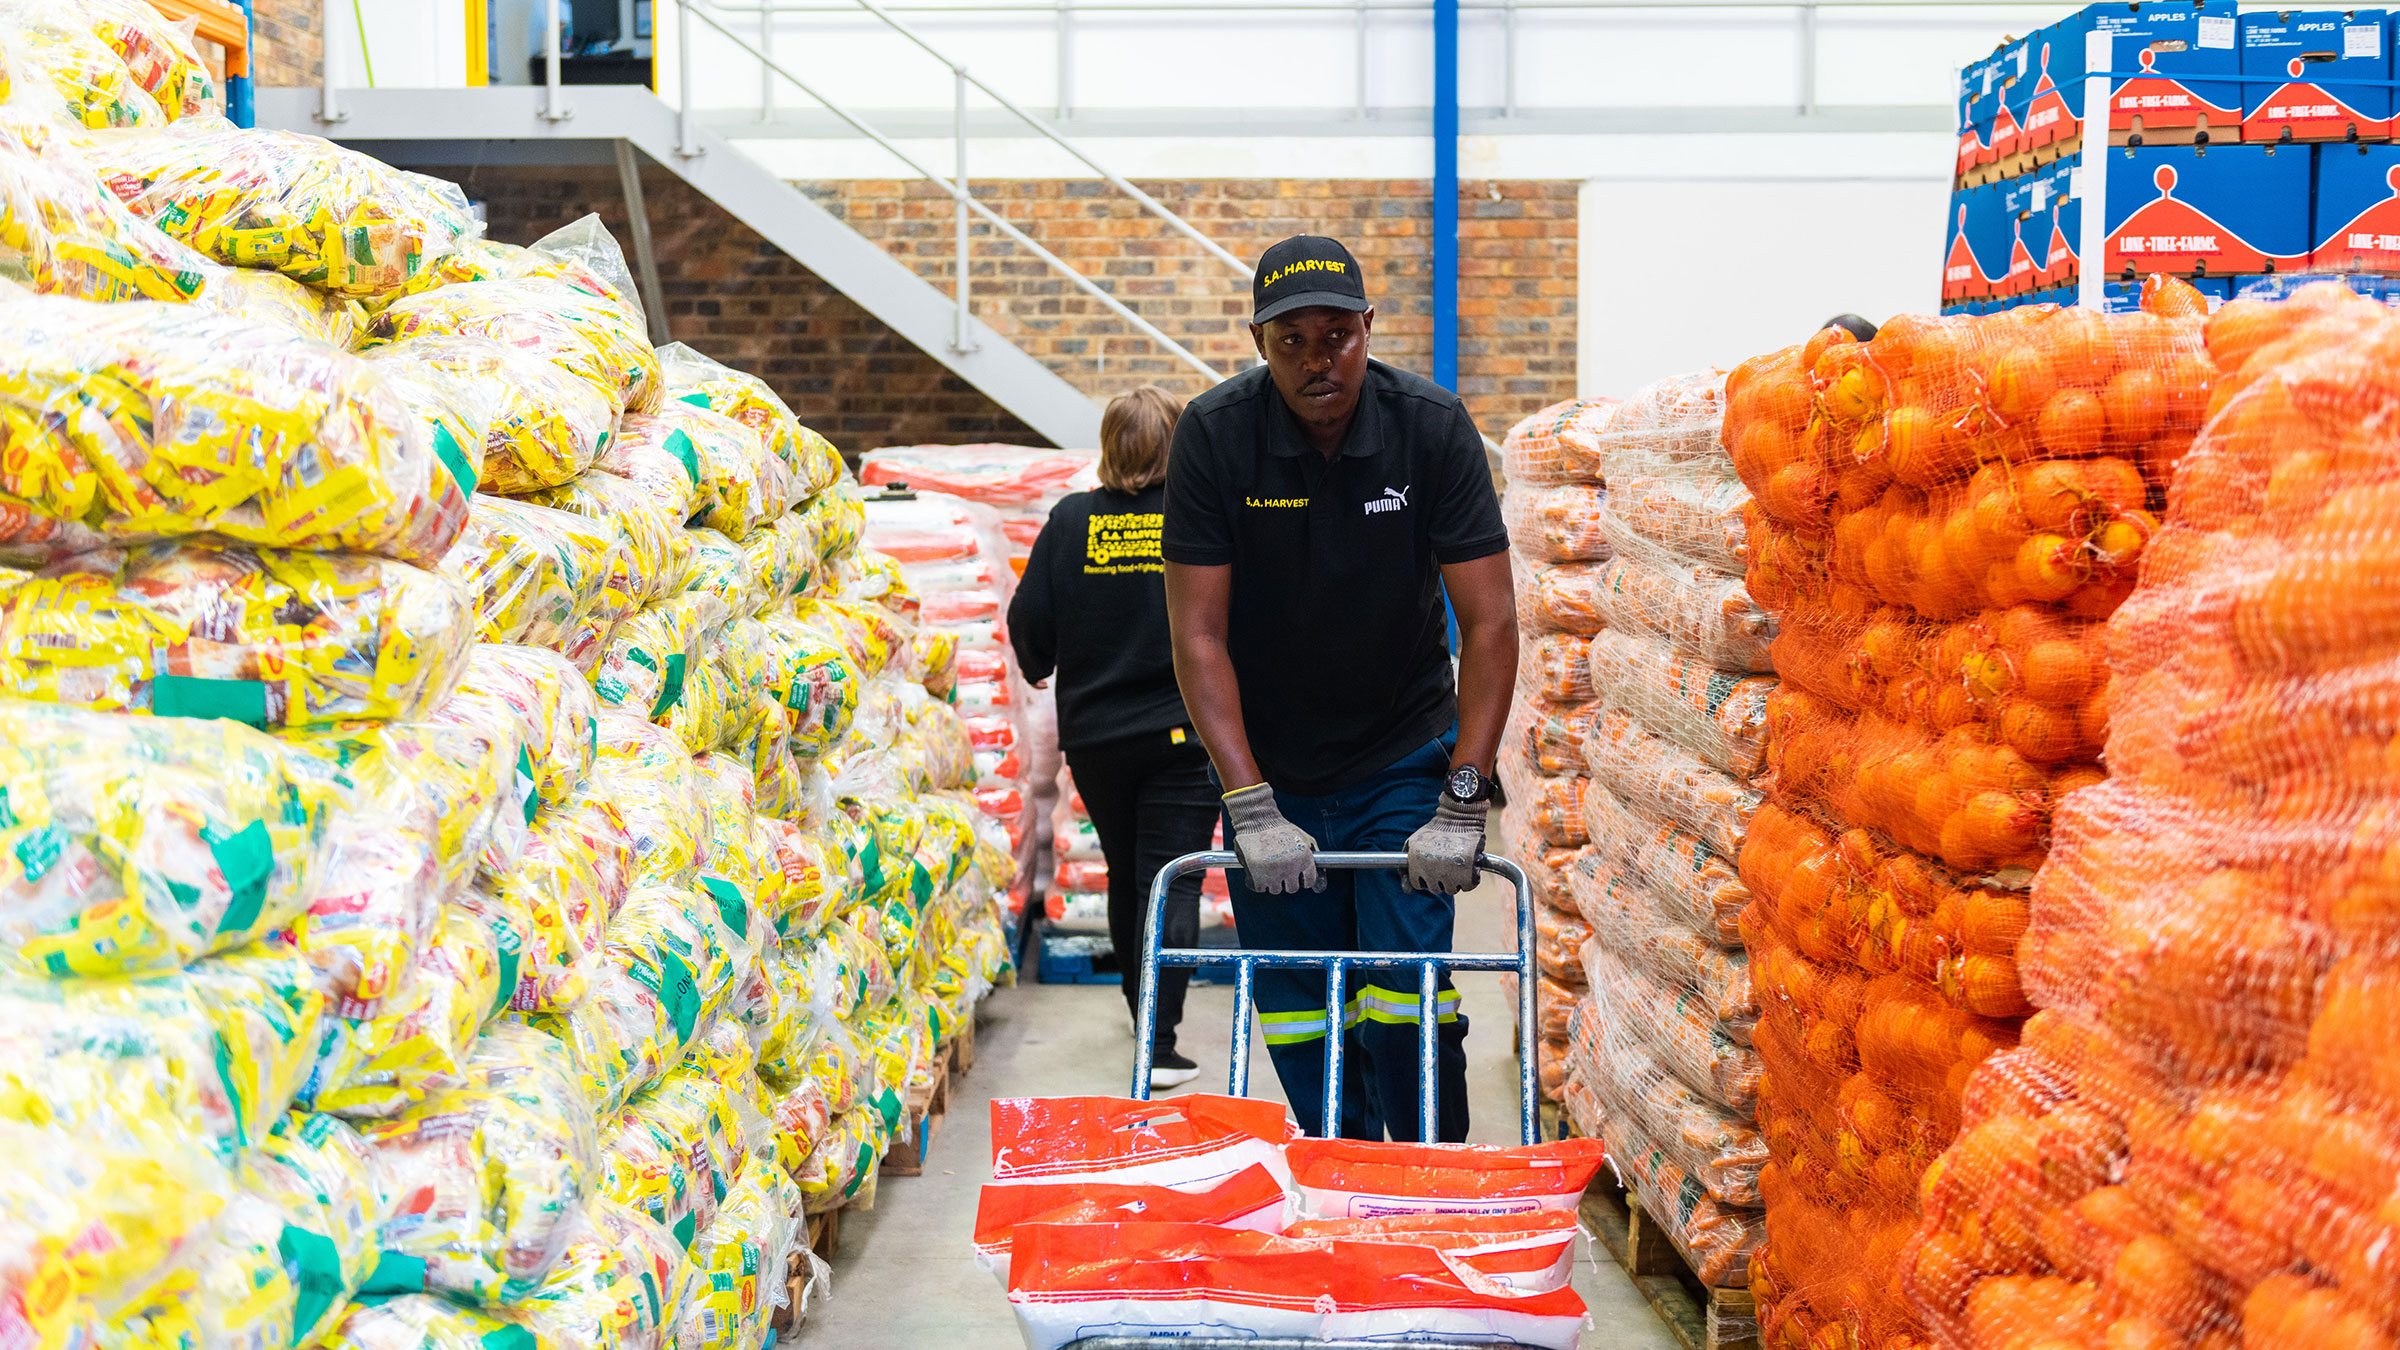 A man pushes a trolley in a food warehouse